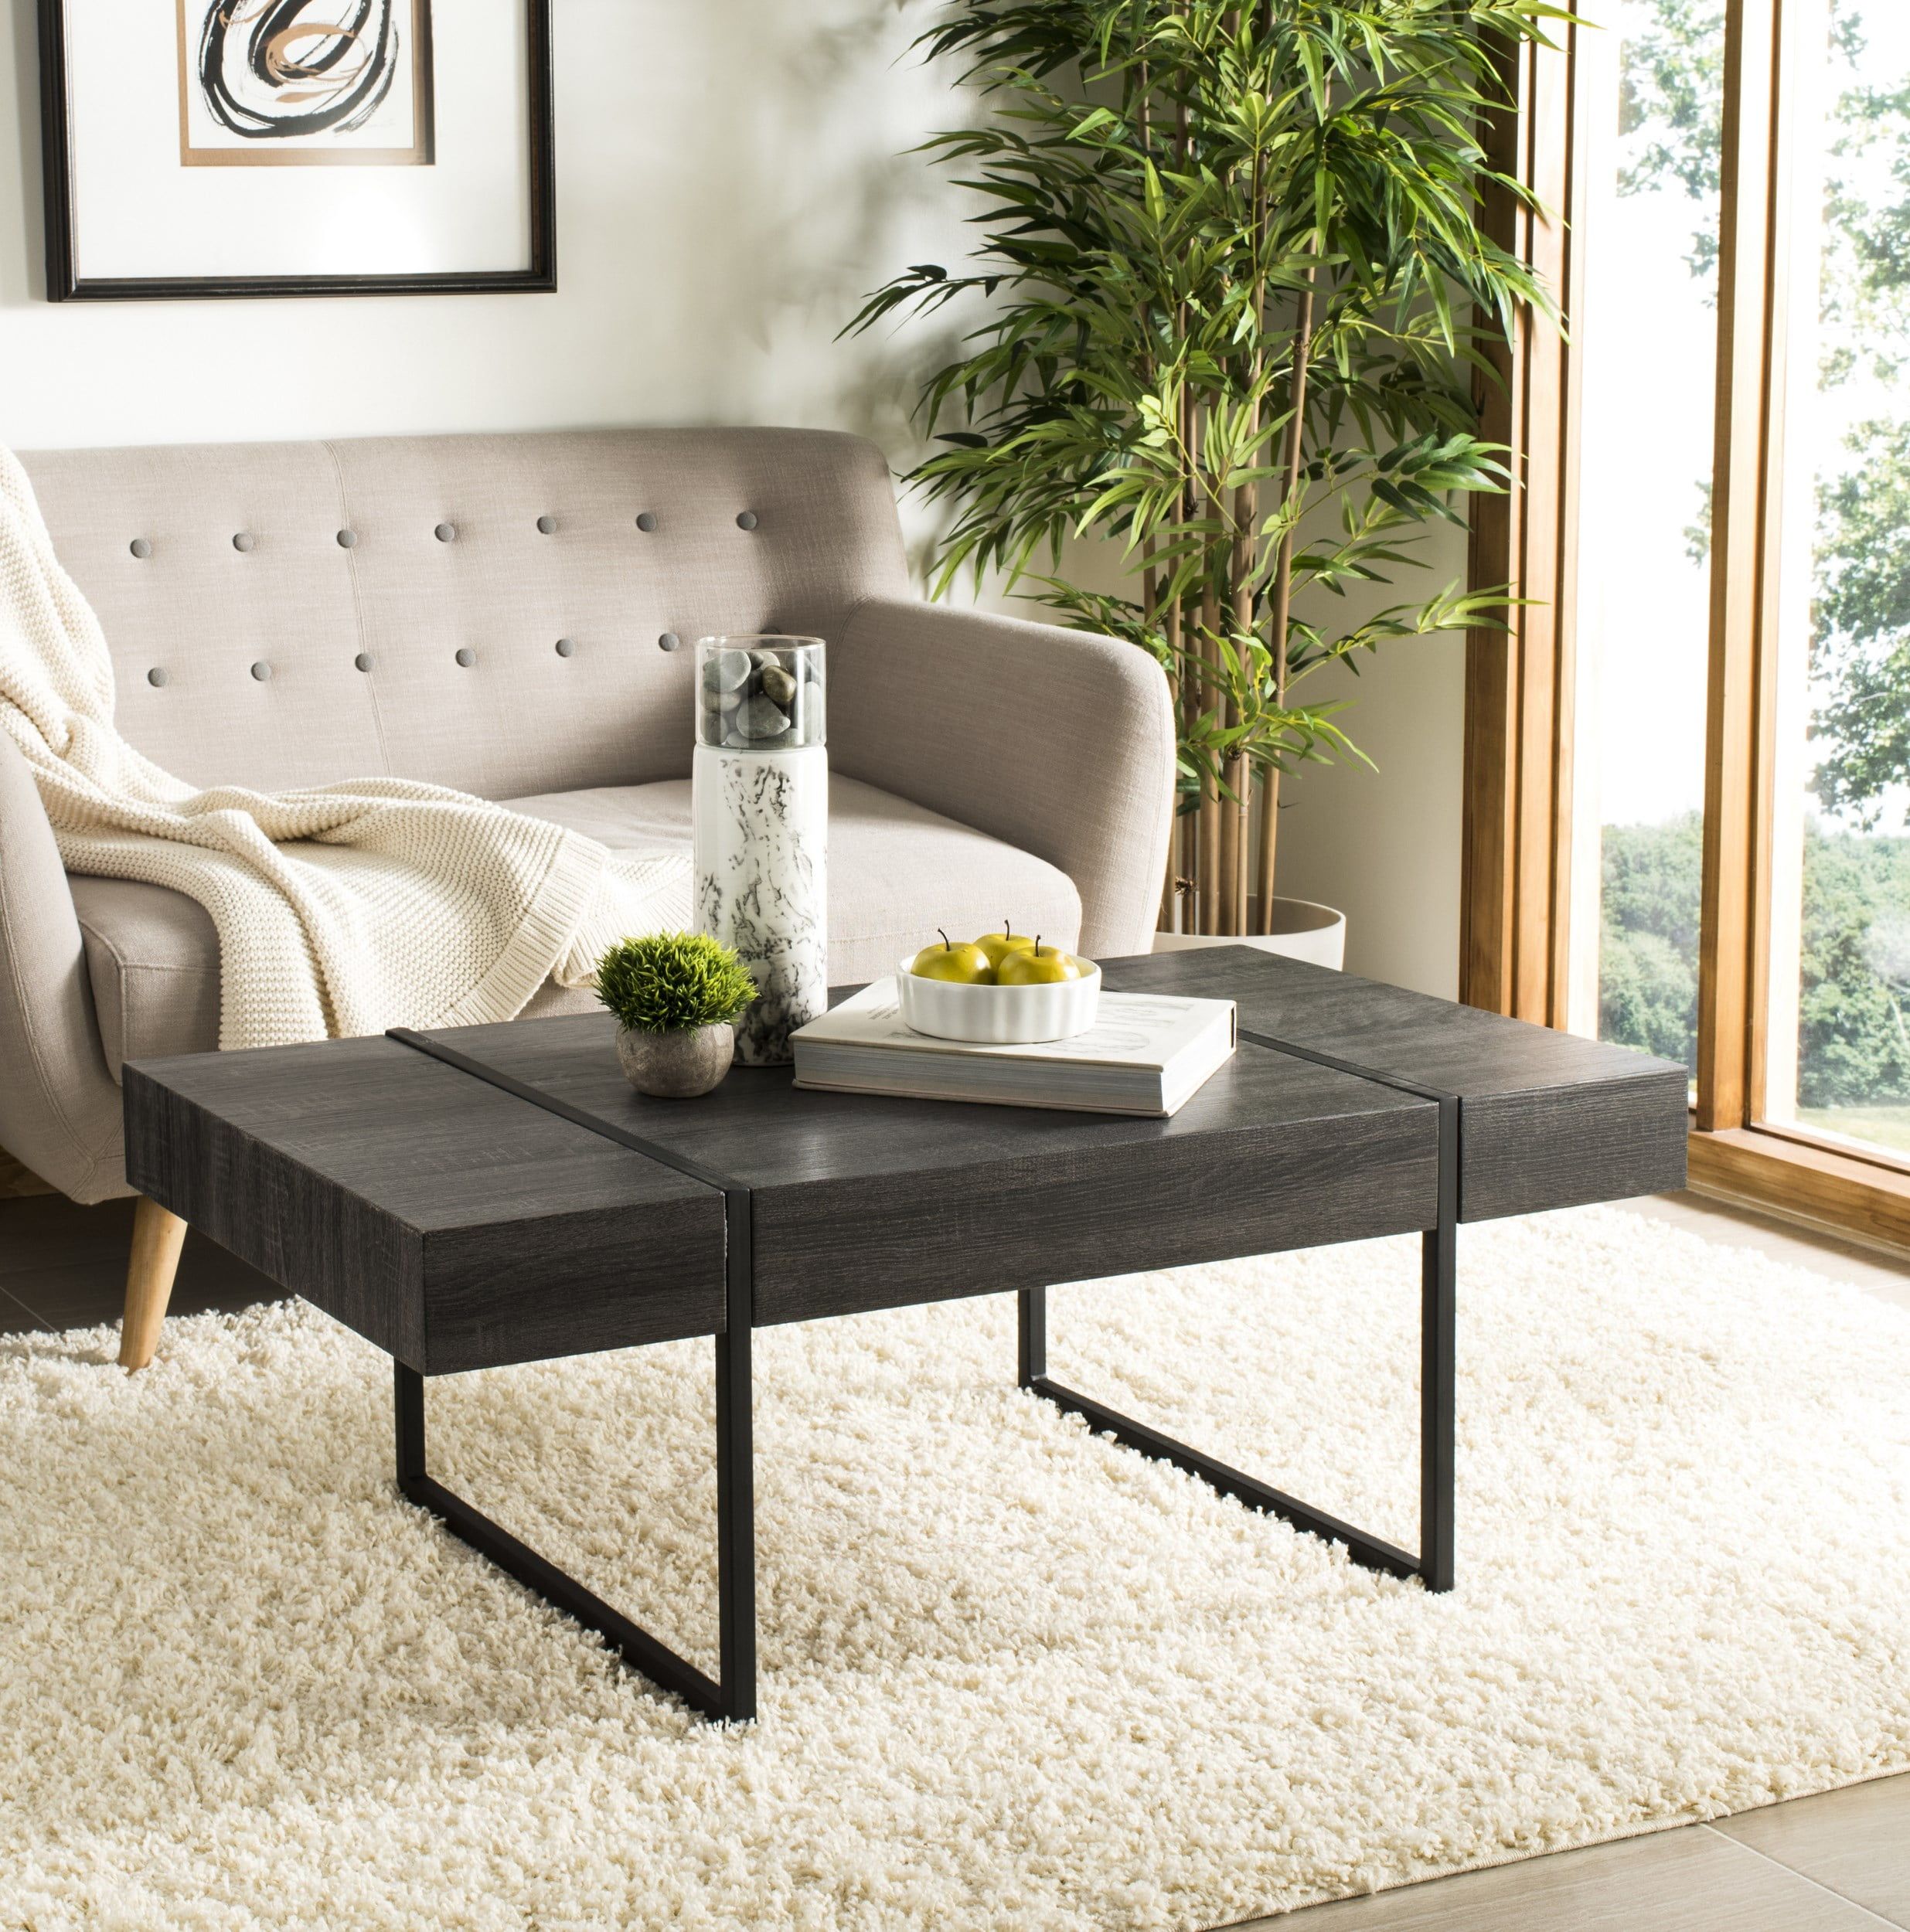 Safavieh Tristan Rectangular Modern Coffee Table Black – Walmart For Rectangle Coffee Tables (View 2 of 15)